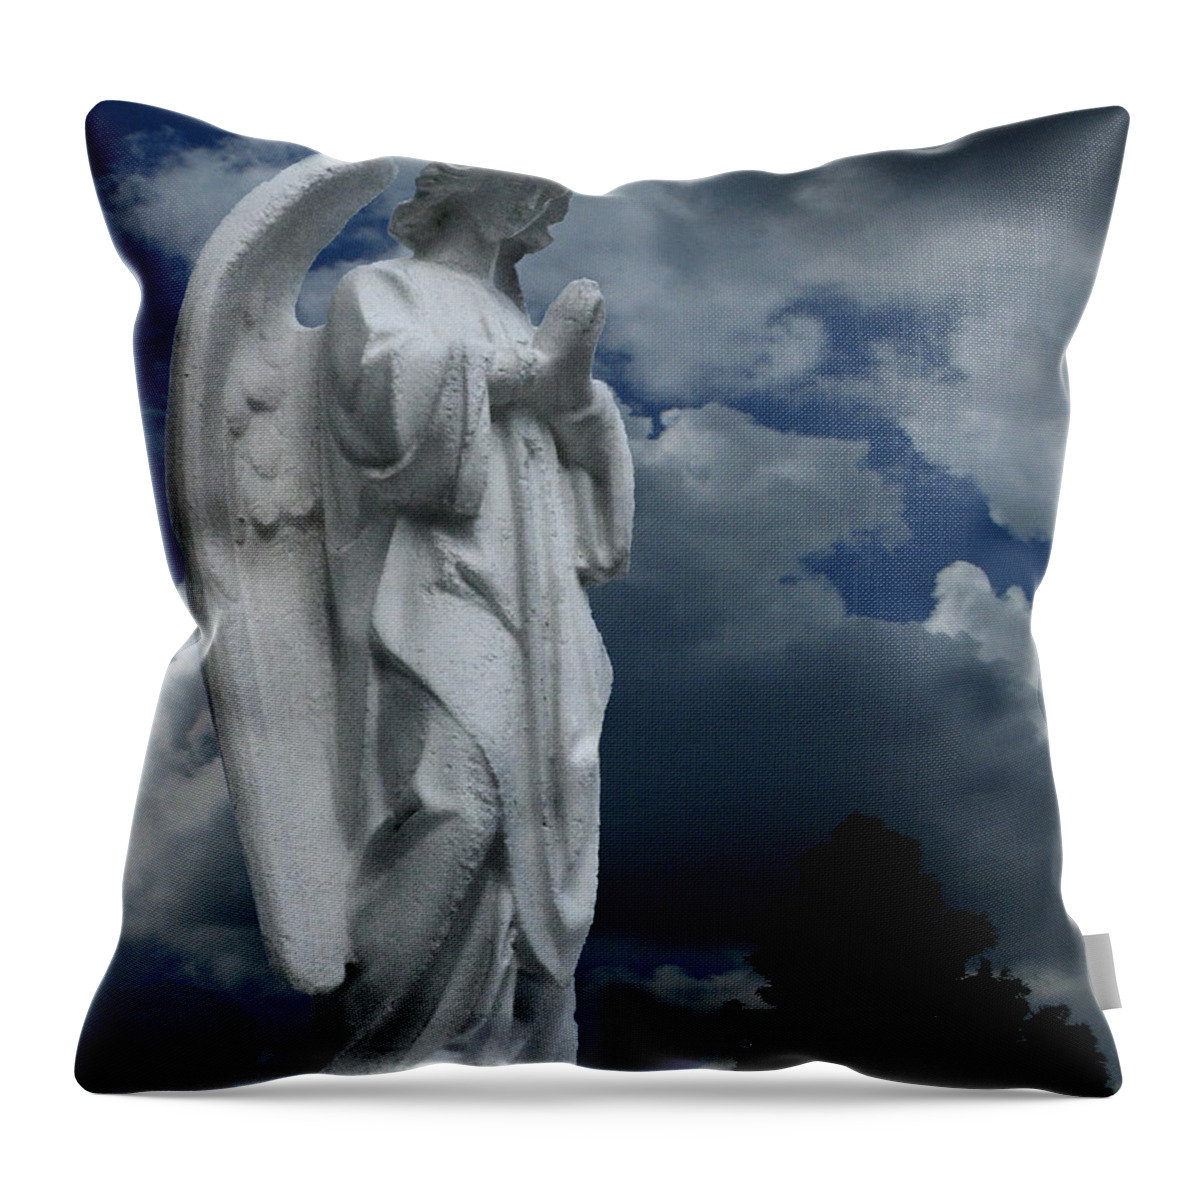 Somewhere Between Heaven And Earth Throw Pillow featuring the photograph Somewhere Between Heaven and Earth by Peter Piatt